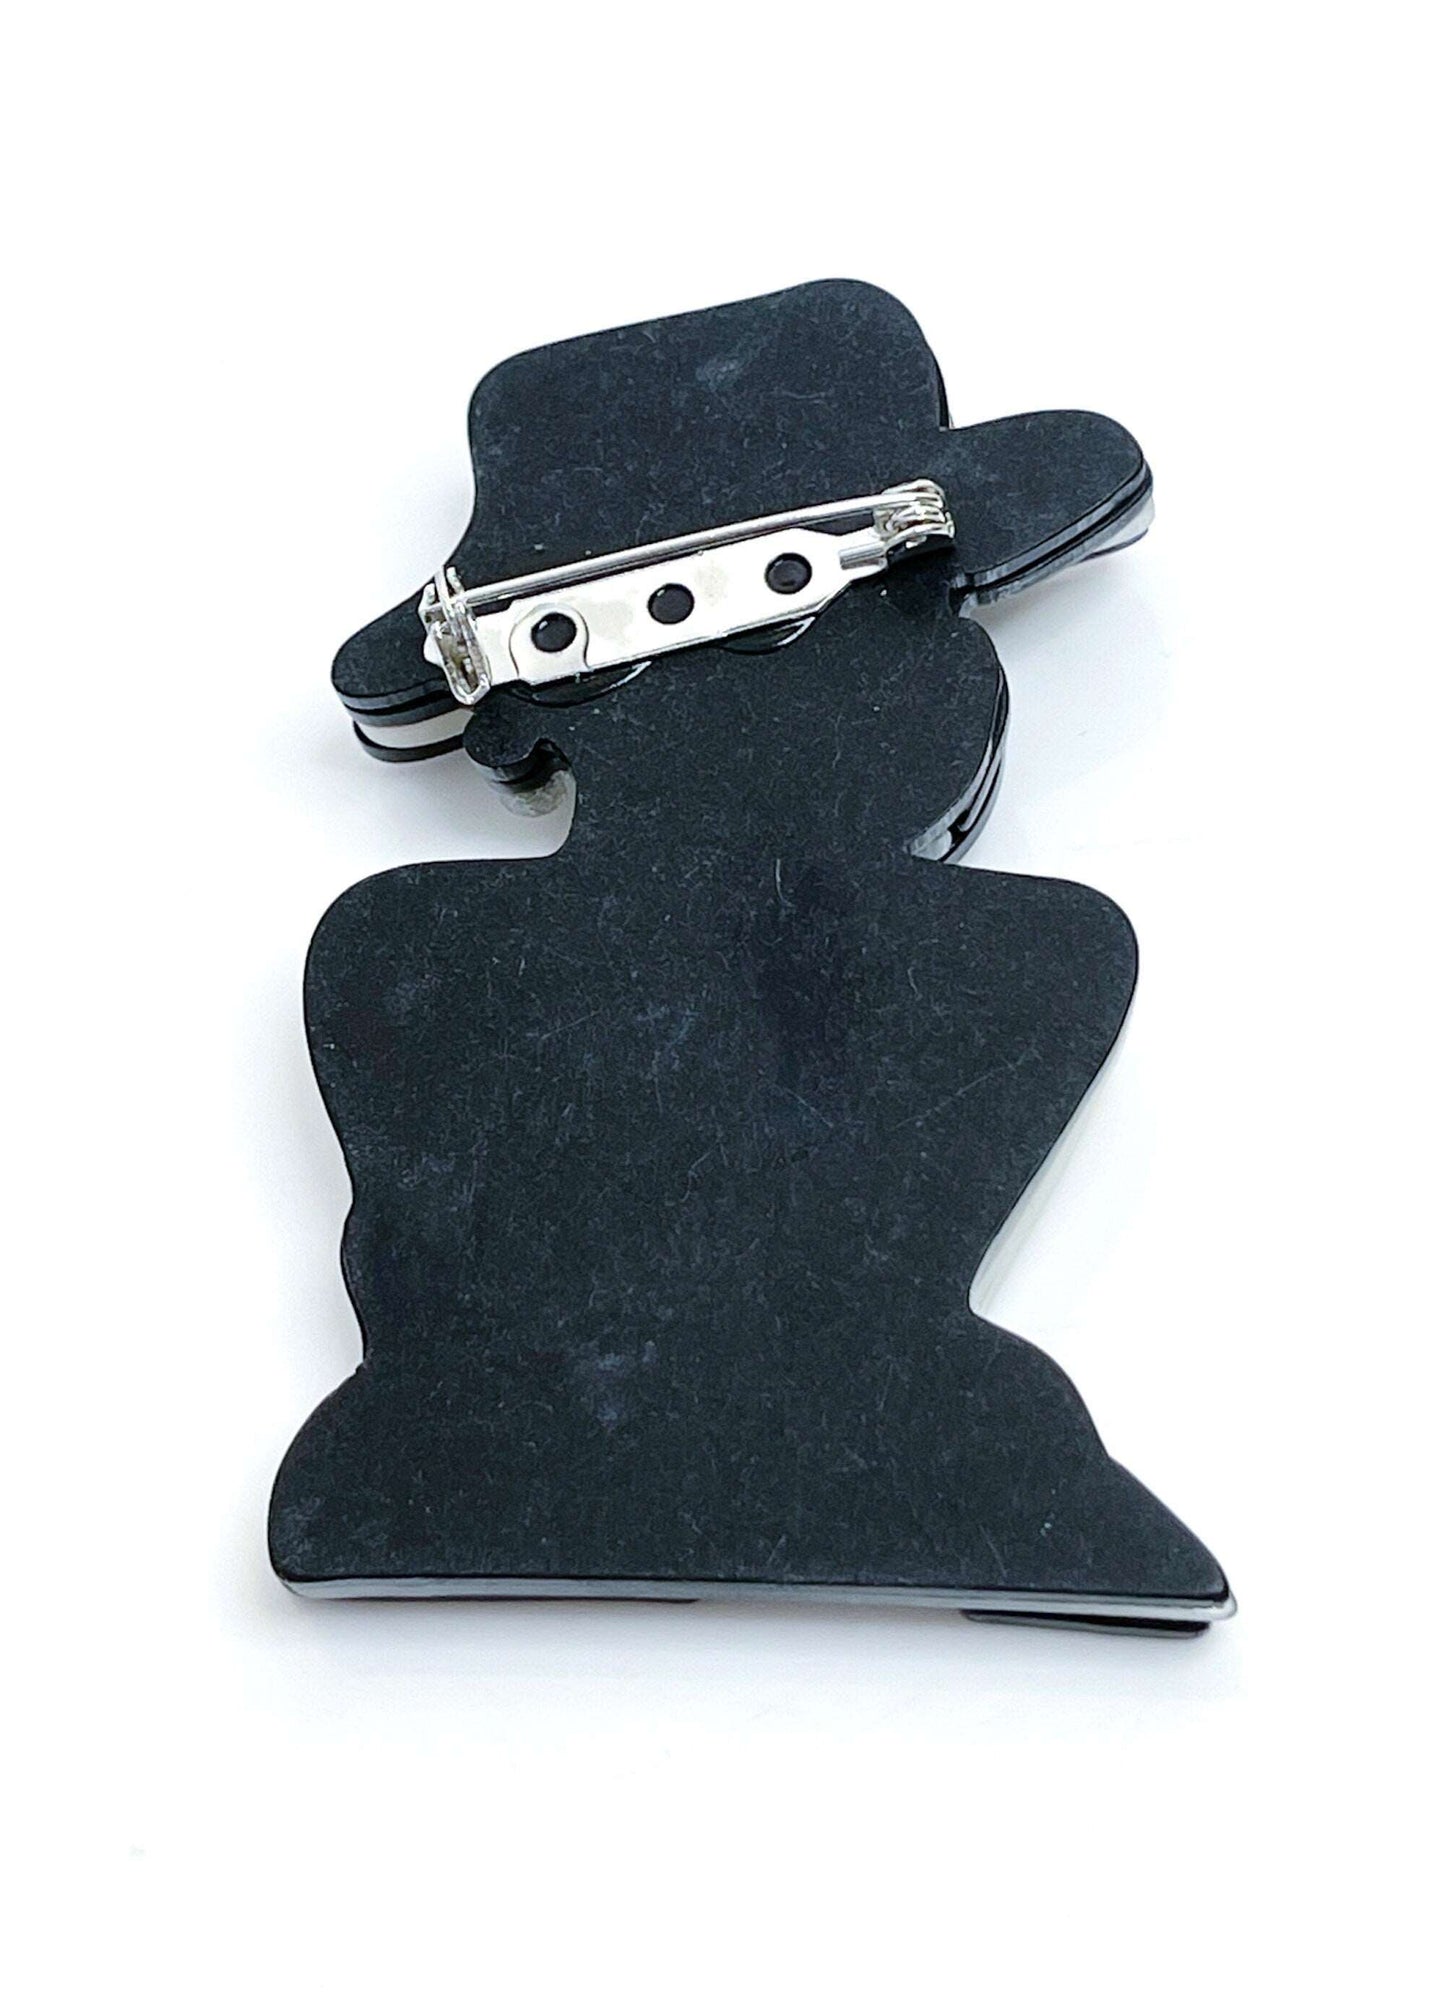 Elegant 1920's Lady Brooch| Lady in Black Hat with Long Gloves Fashion Pin